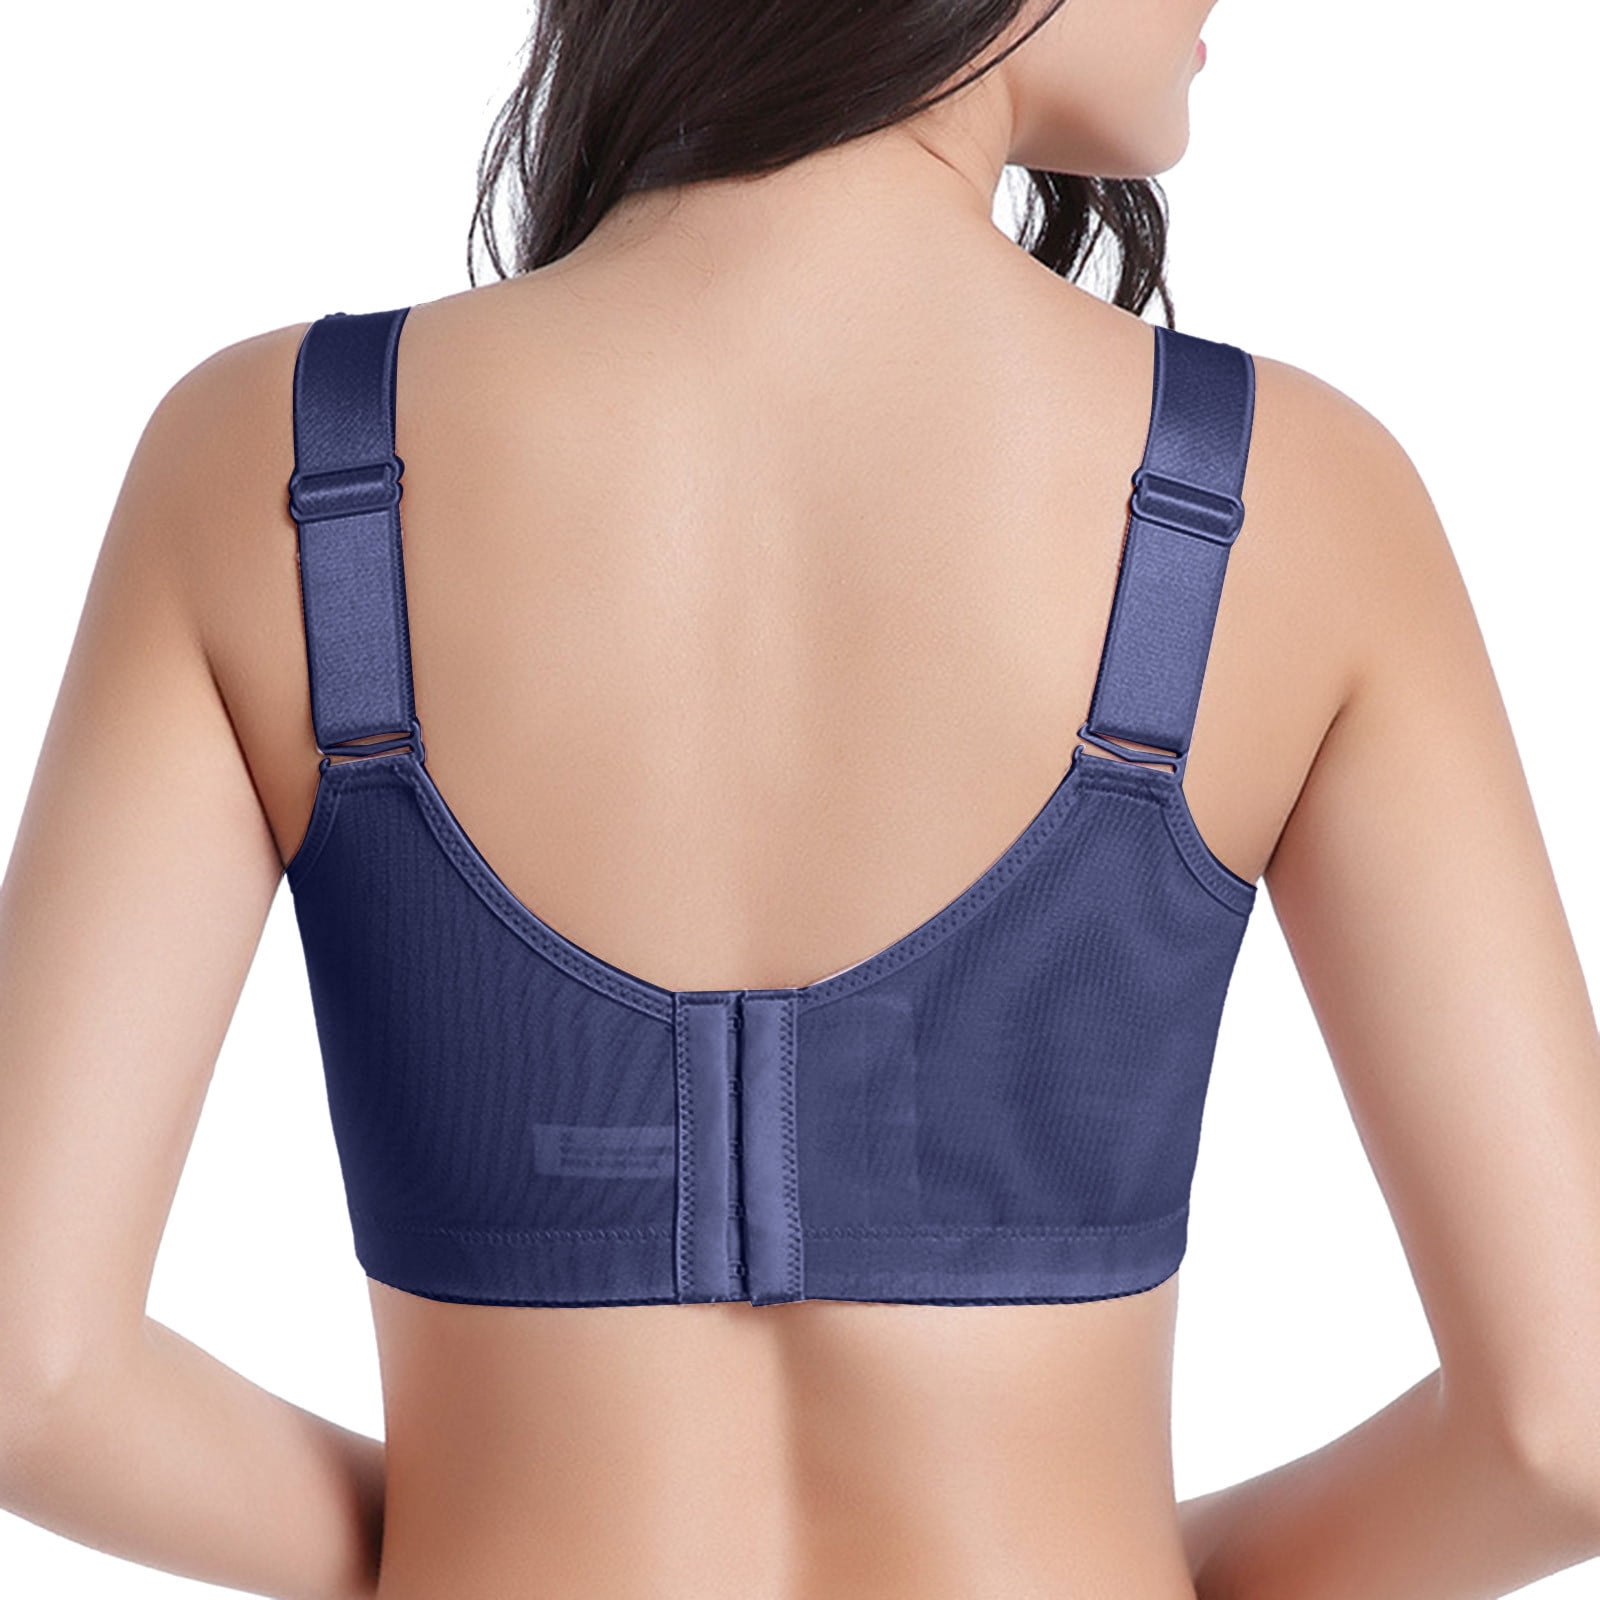 Aayomet Push Up Bras for Women Padded Medium Support Yoga Bra Workout Bra  Workout Tops for Women (Gray, 75B) 